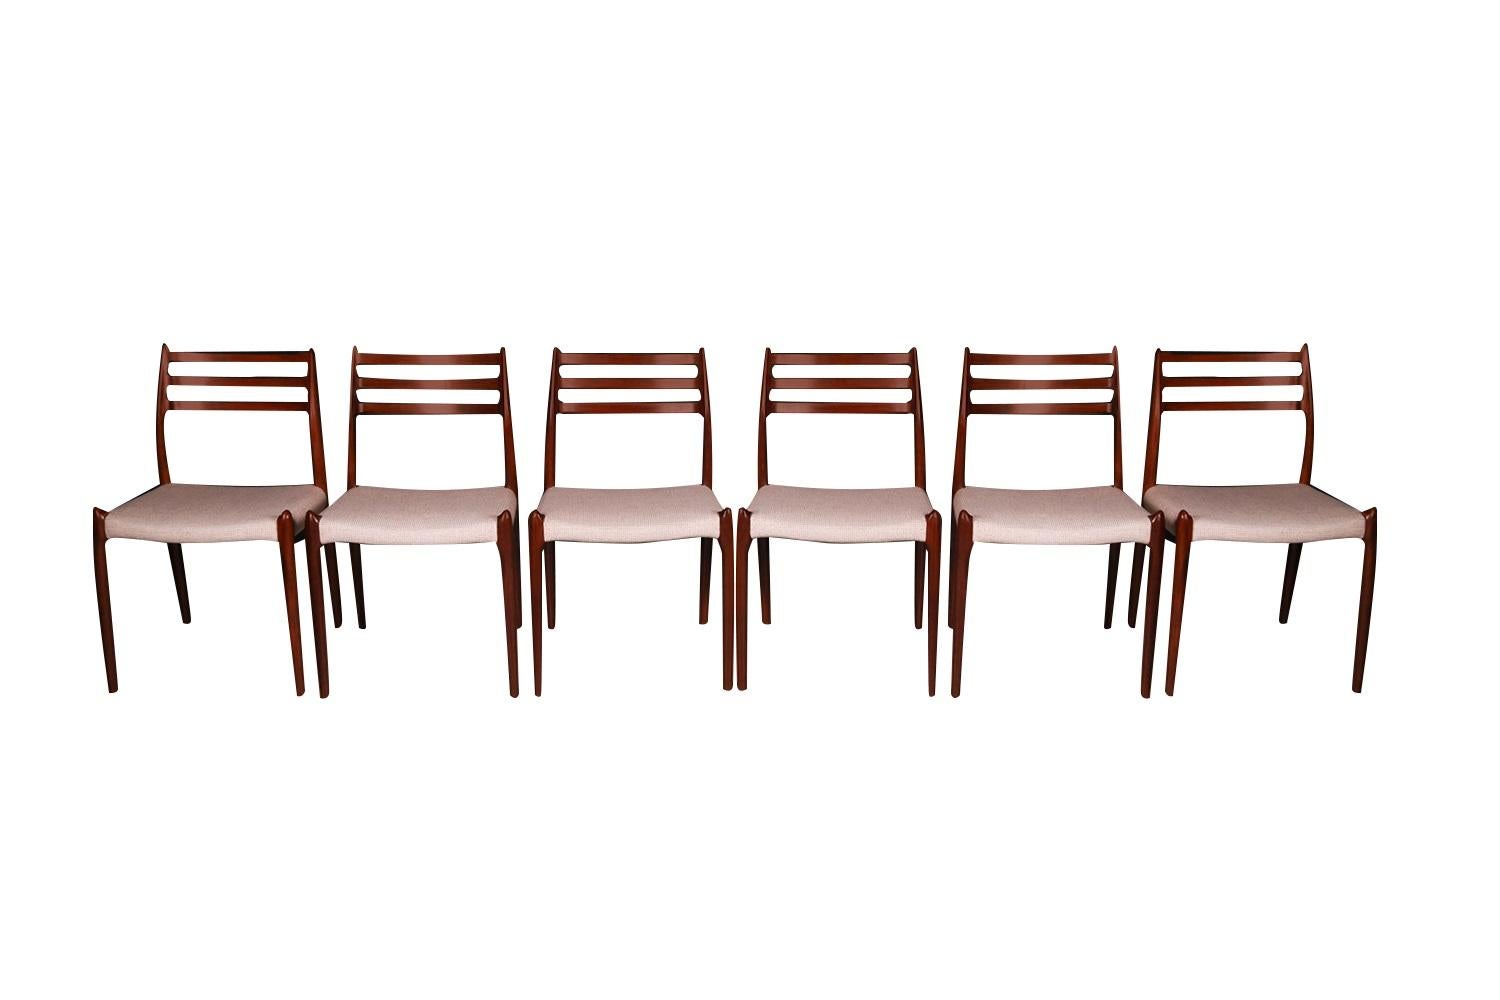 An absolutely stunning set of six Mid-Century Danish Modern Rosewood dining chairs model 78 designed by Niels Otto Moller for J.L. Møllers Møbelfabrik in Denmark. Makers Stamp (Moller Models made in Denmark) underneath seats. These gorgeous chairs